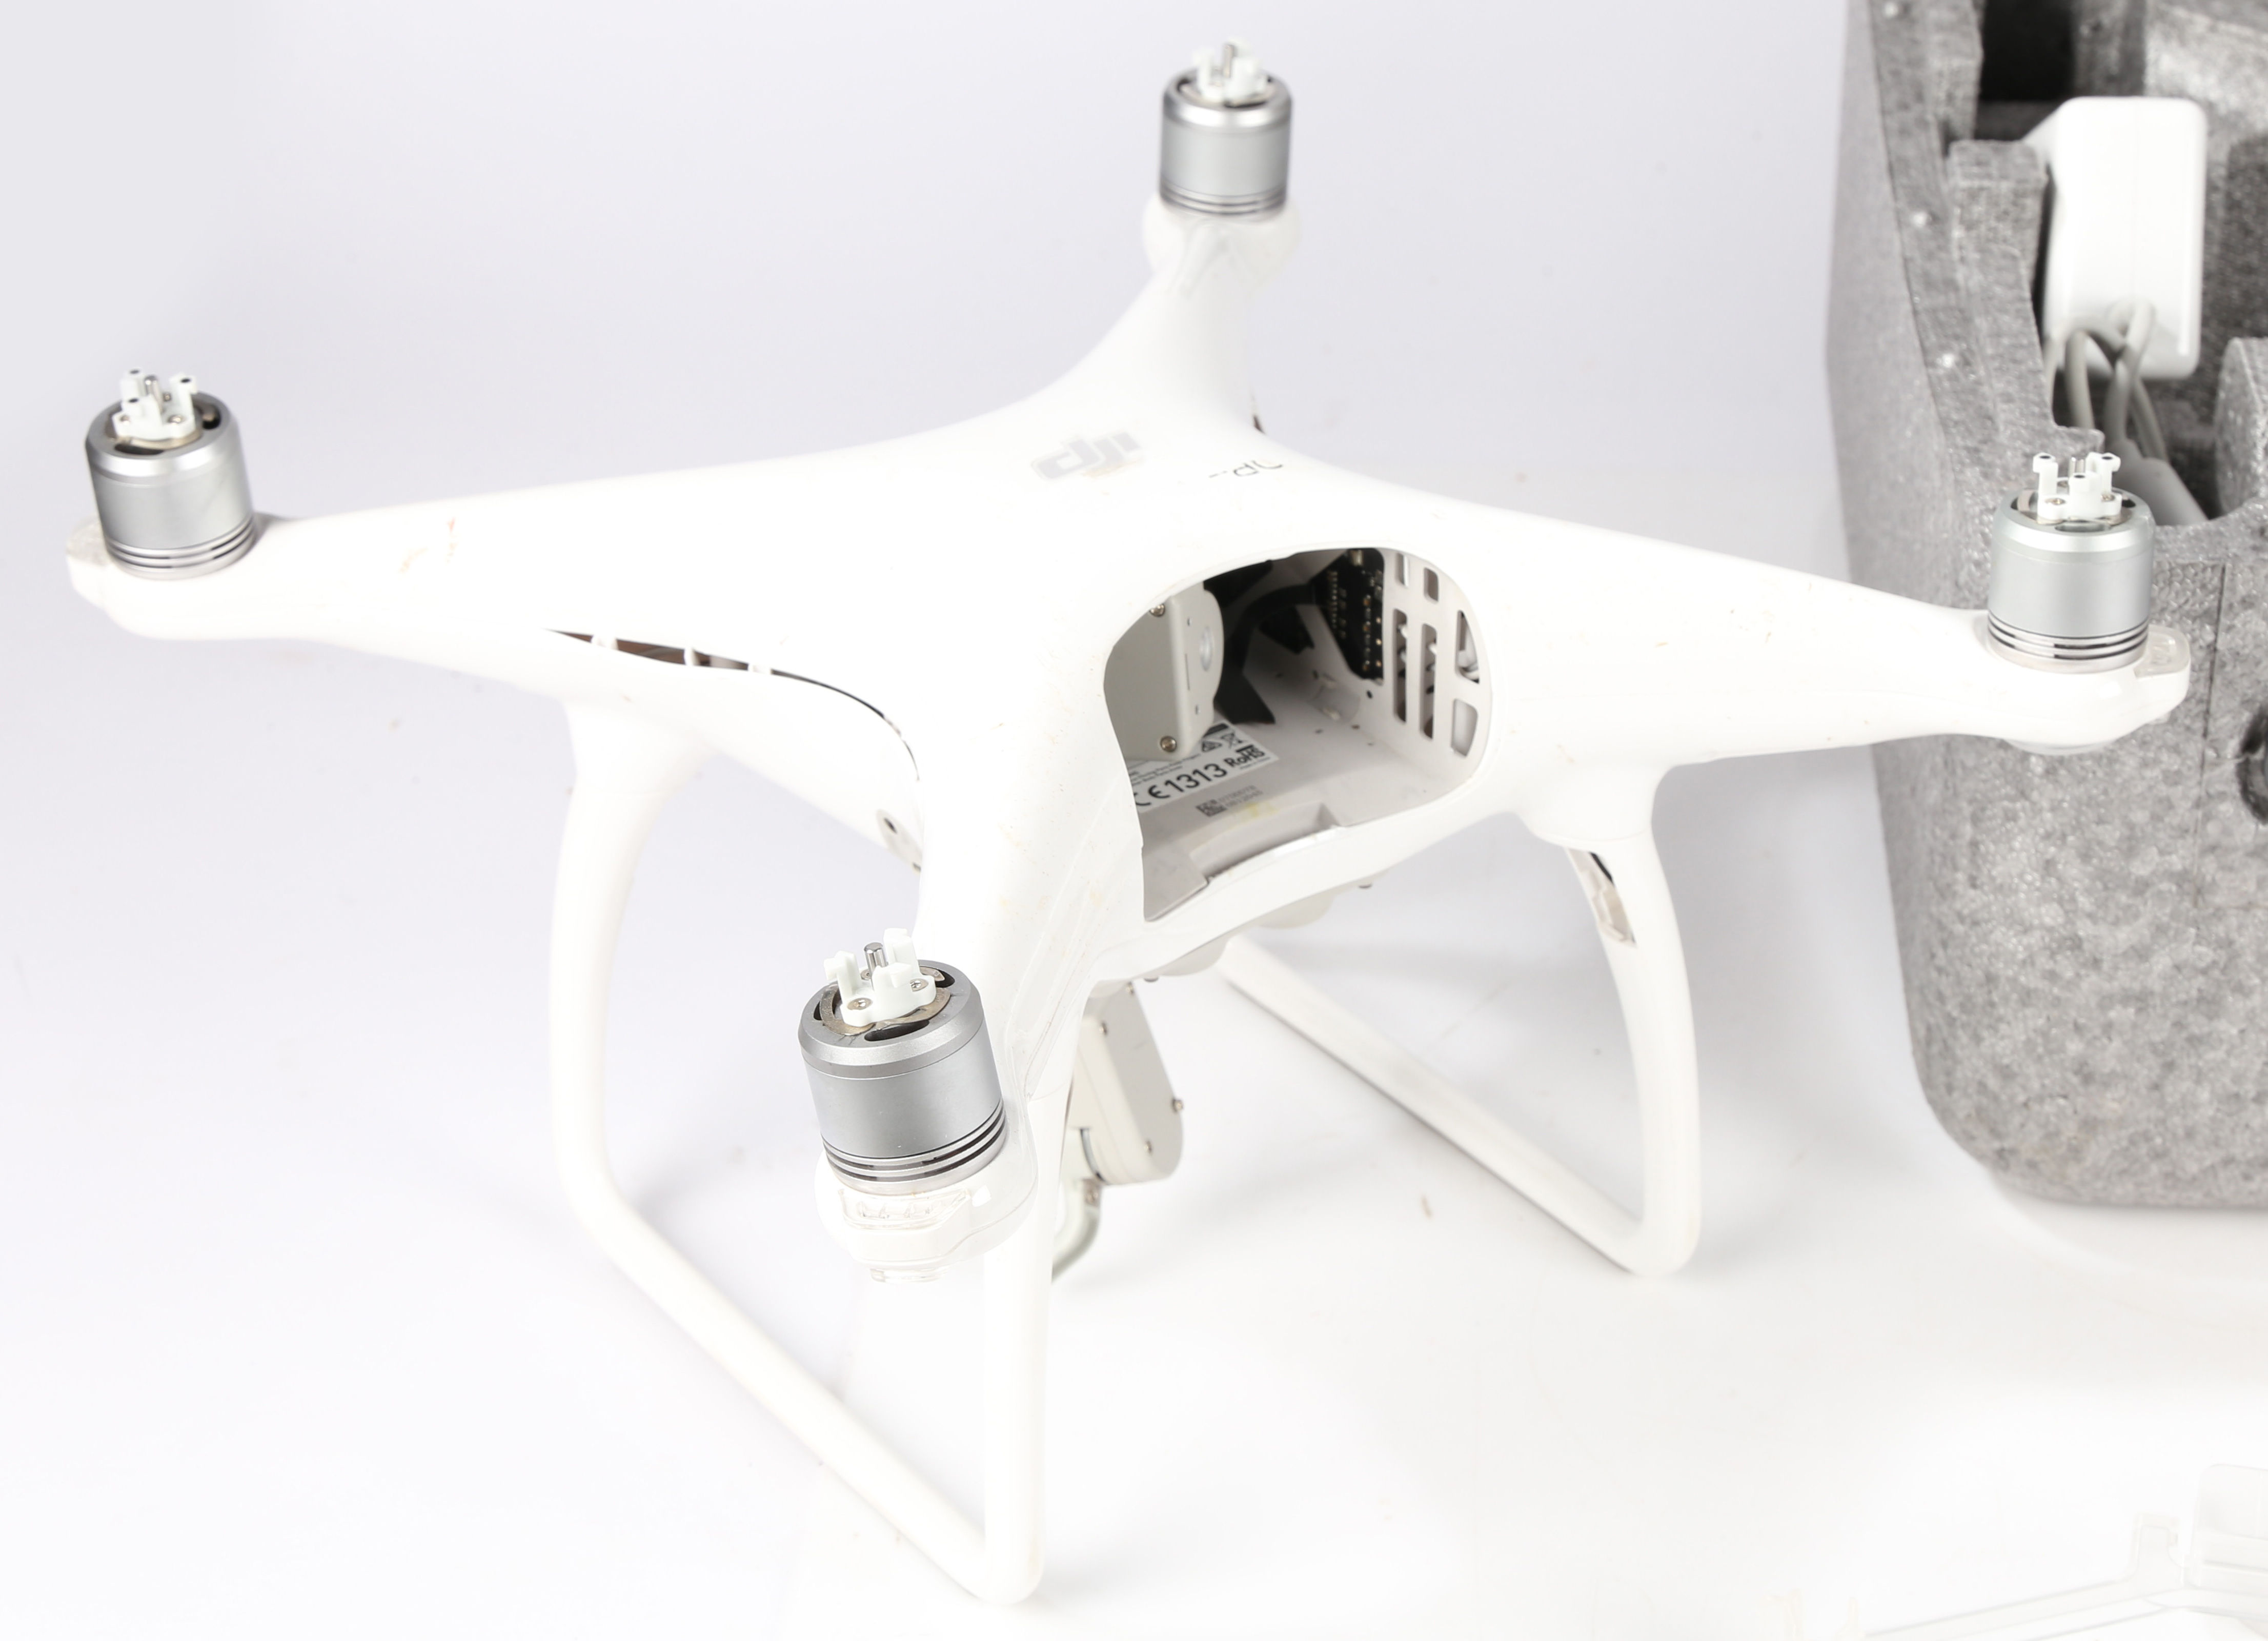 DJI Phantom 4 Drone with fitted carrying case, controller, charger, manual, etc. (damaged, - Image 5 of 5